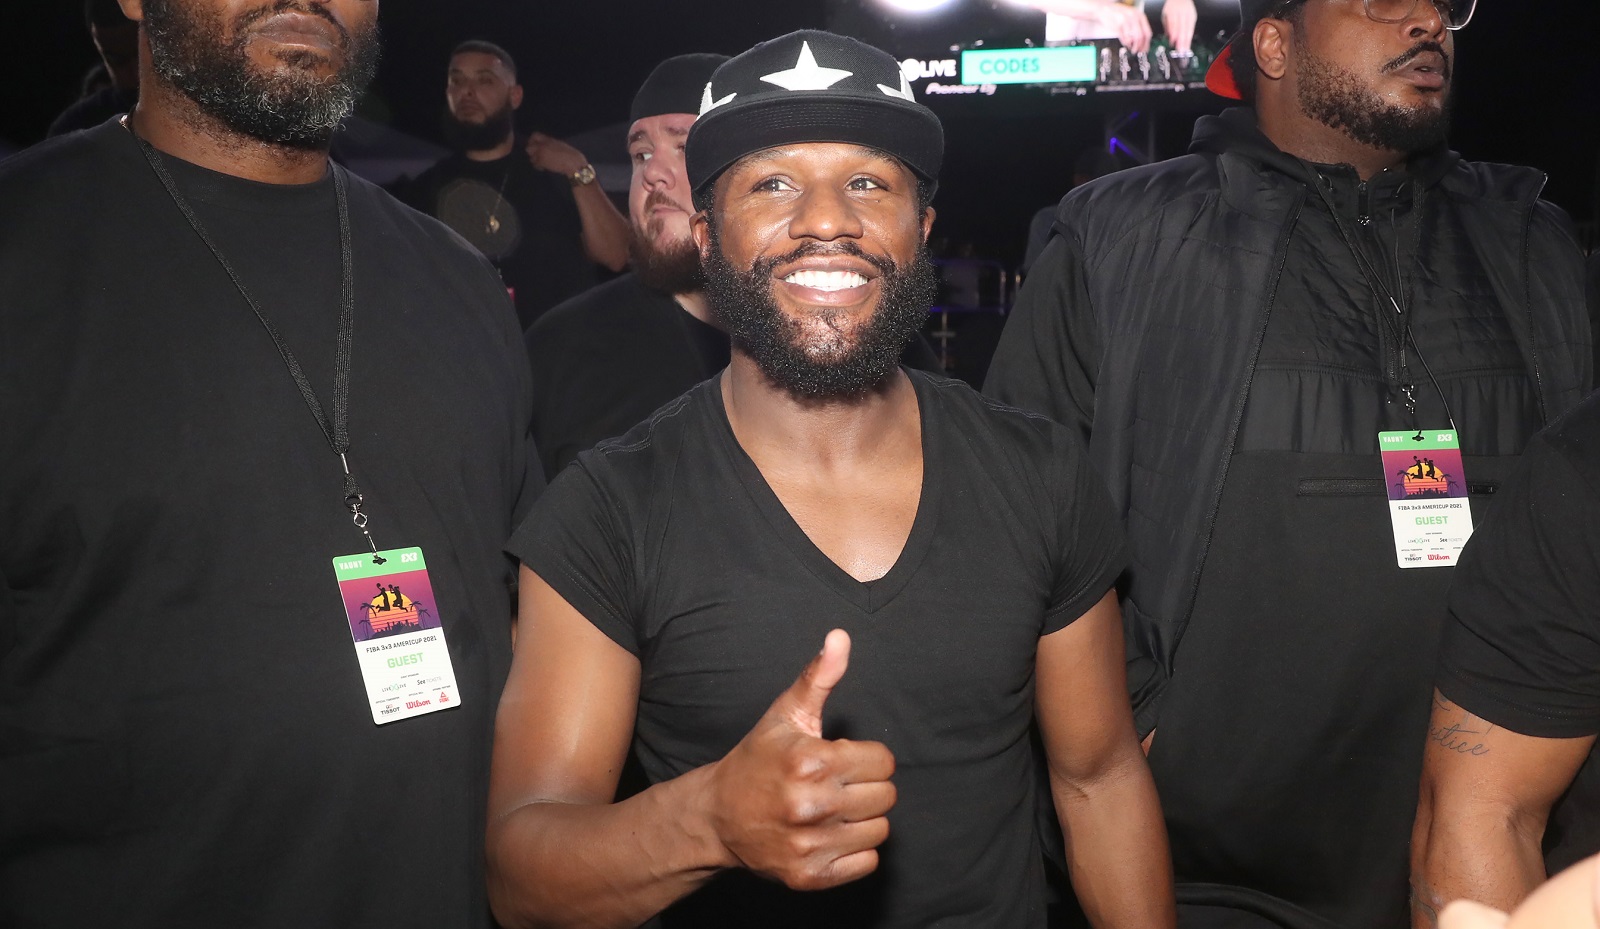 Floyd Mayweather retired from boxing with a 50-0 record and now co-owns the No. 50 Chevy in the NASCAR Cup Series. | Johnny Nunez/WireImage